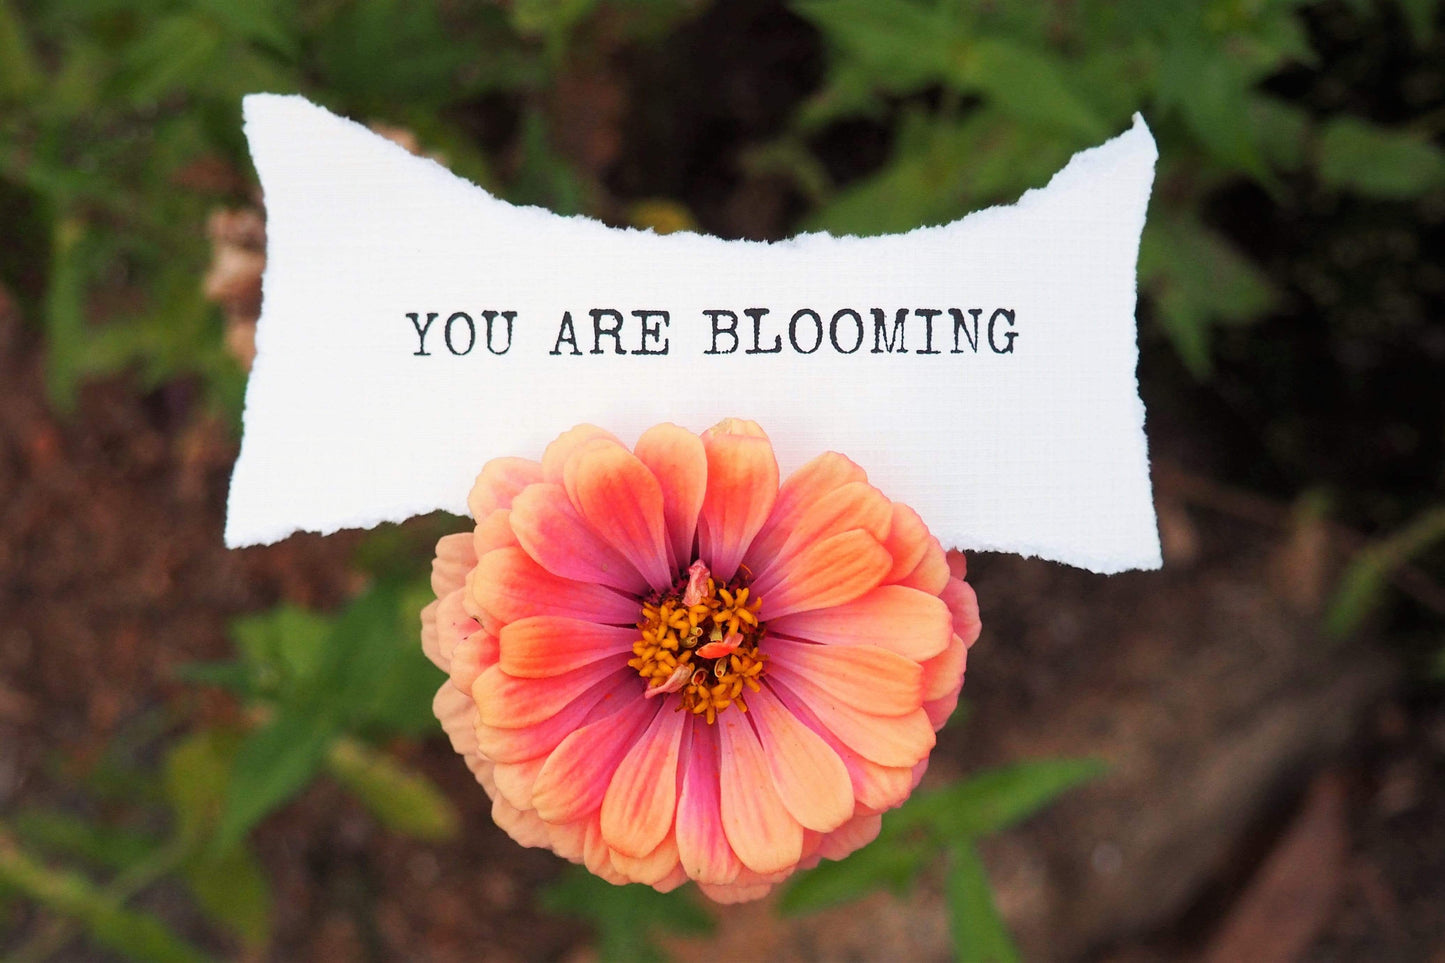 "You Are Blooming" Pink Zinnia Affirmation Photo Artwork | Desk Decor